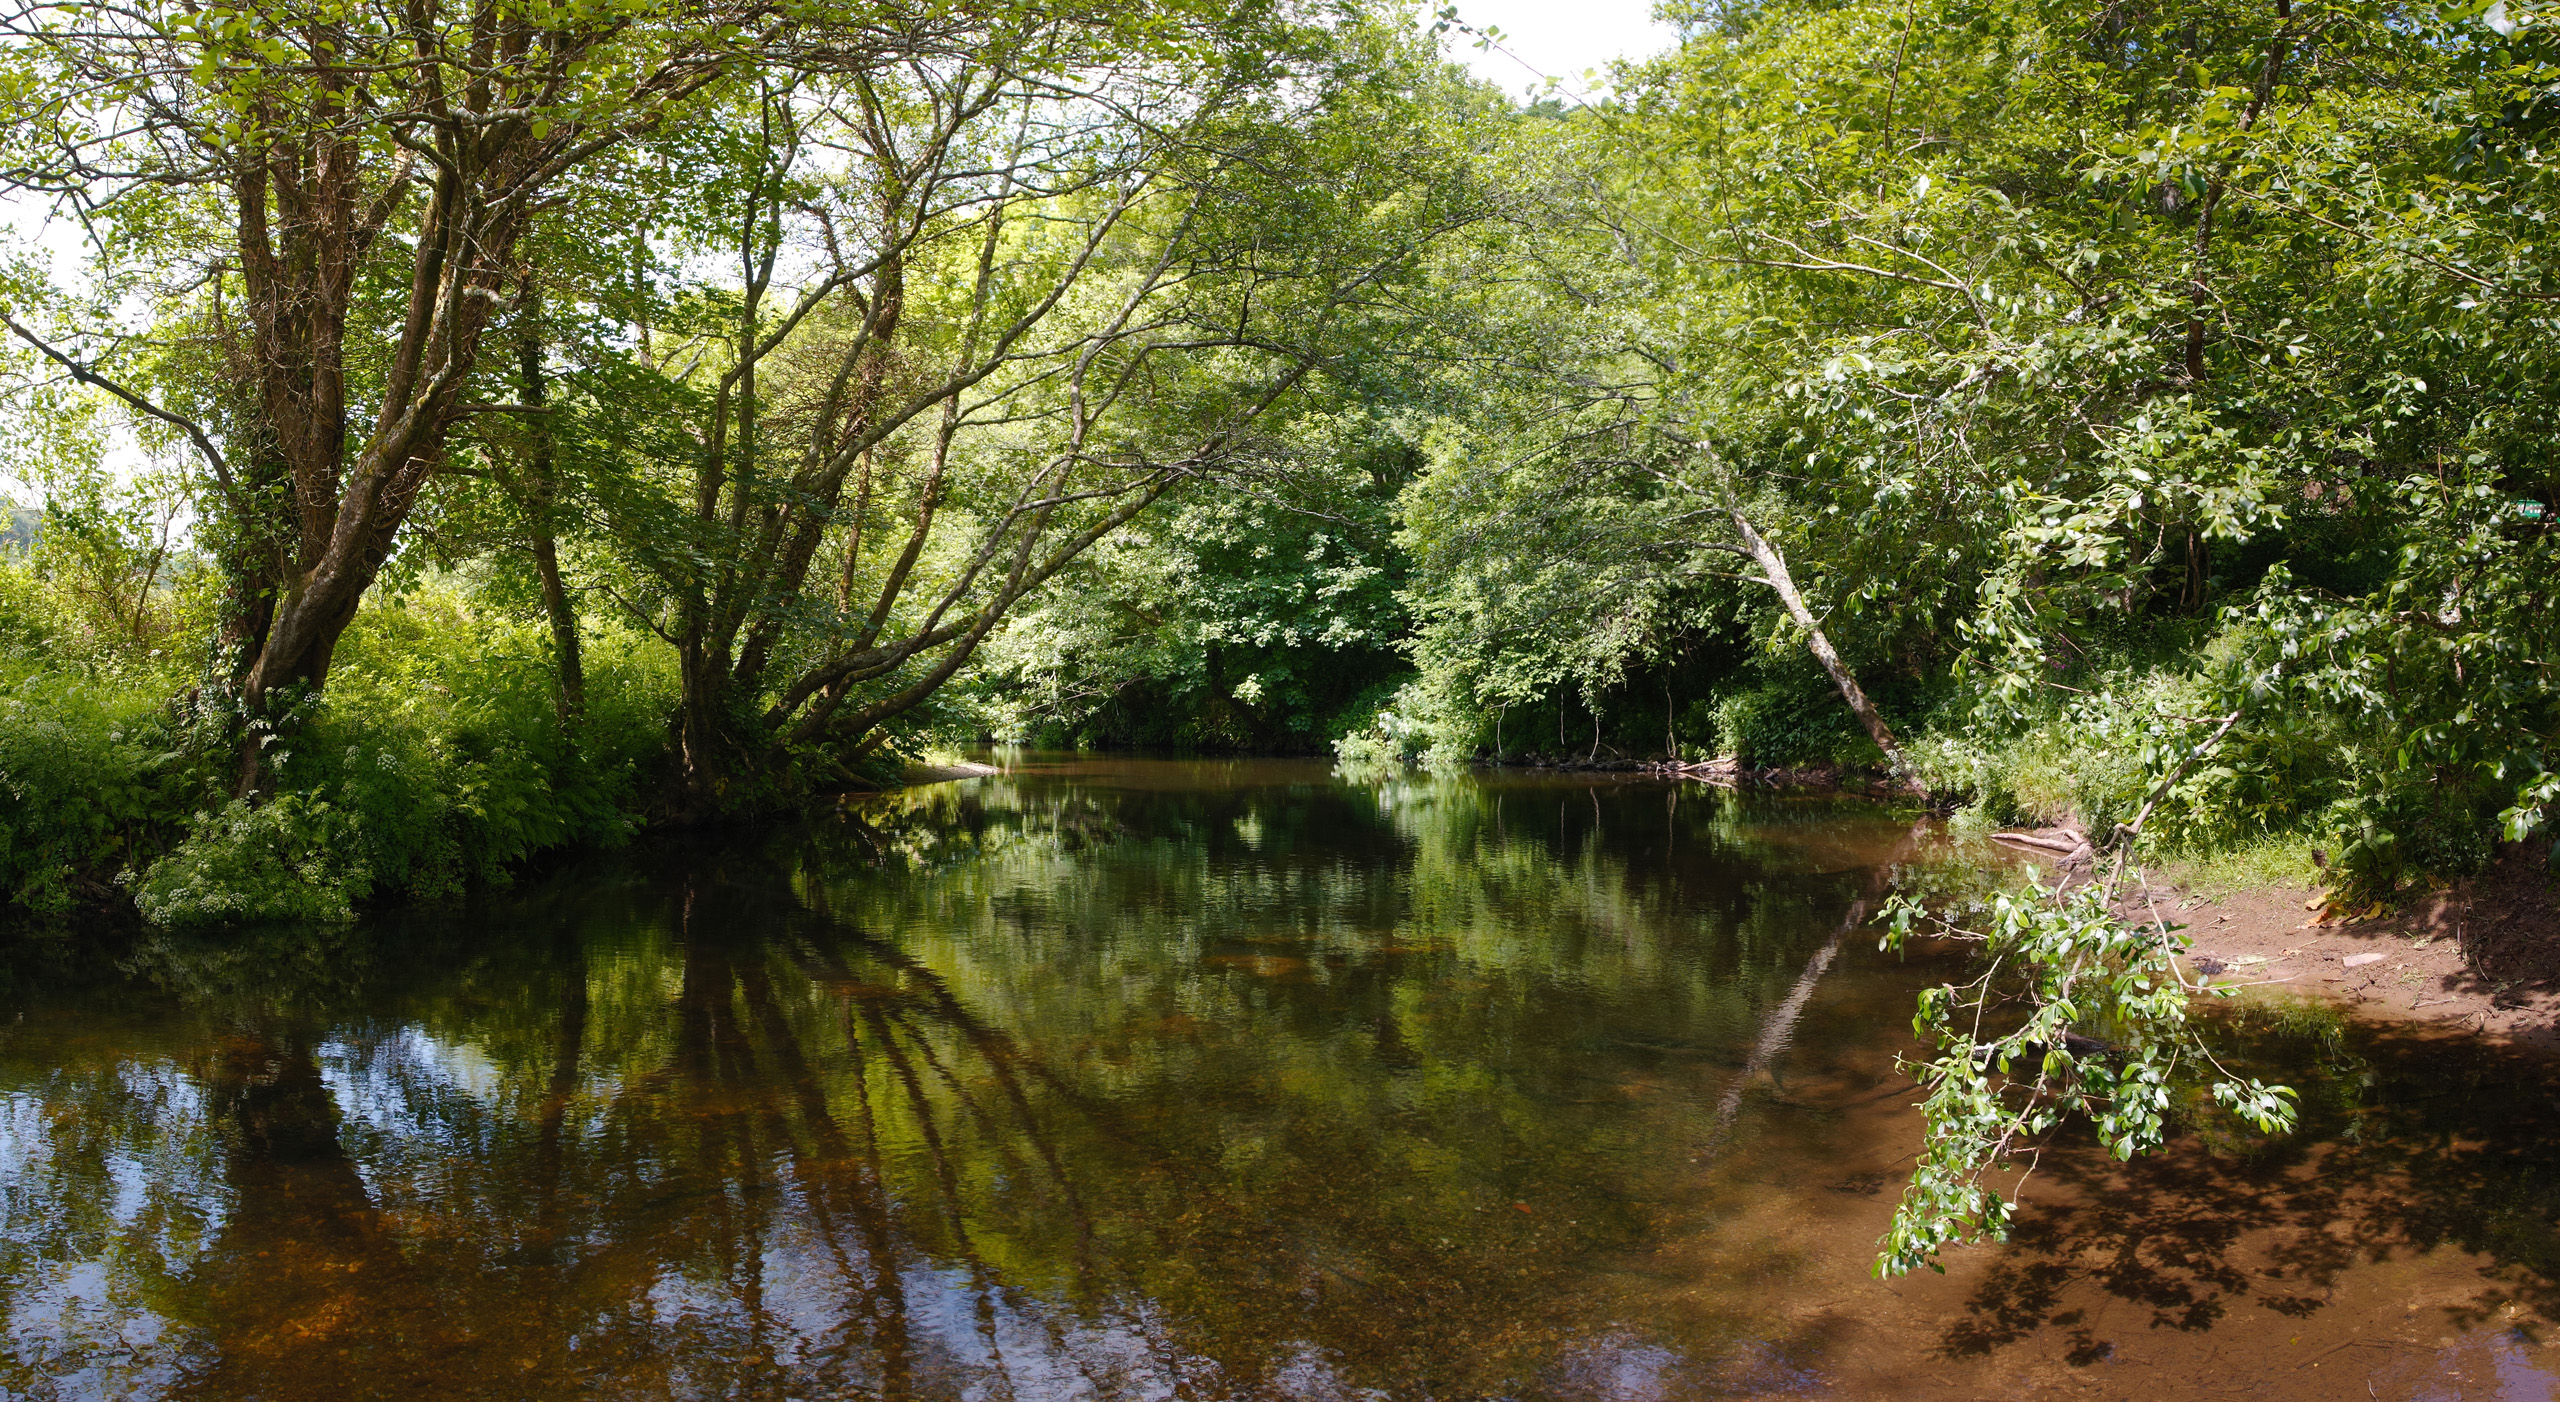 The River Camel along the Camel Trail